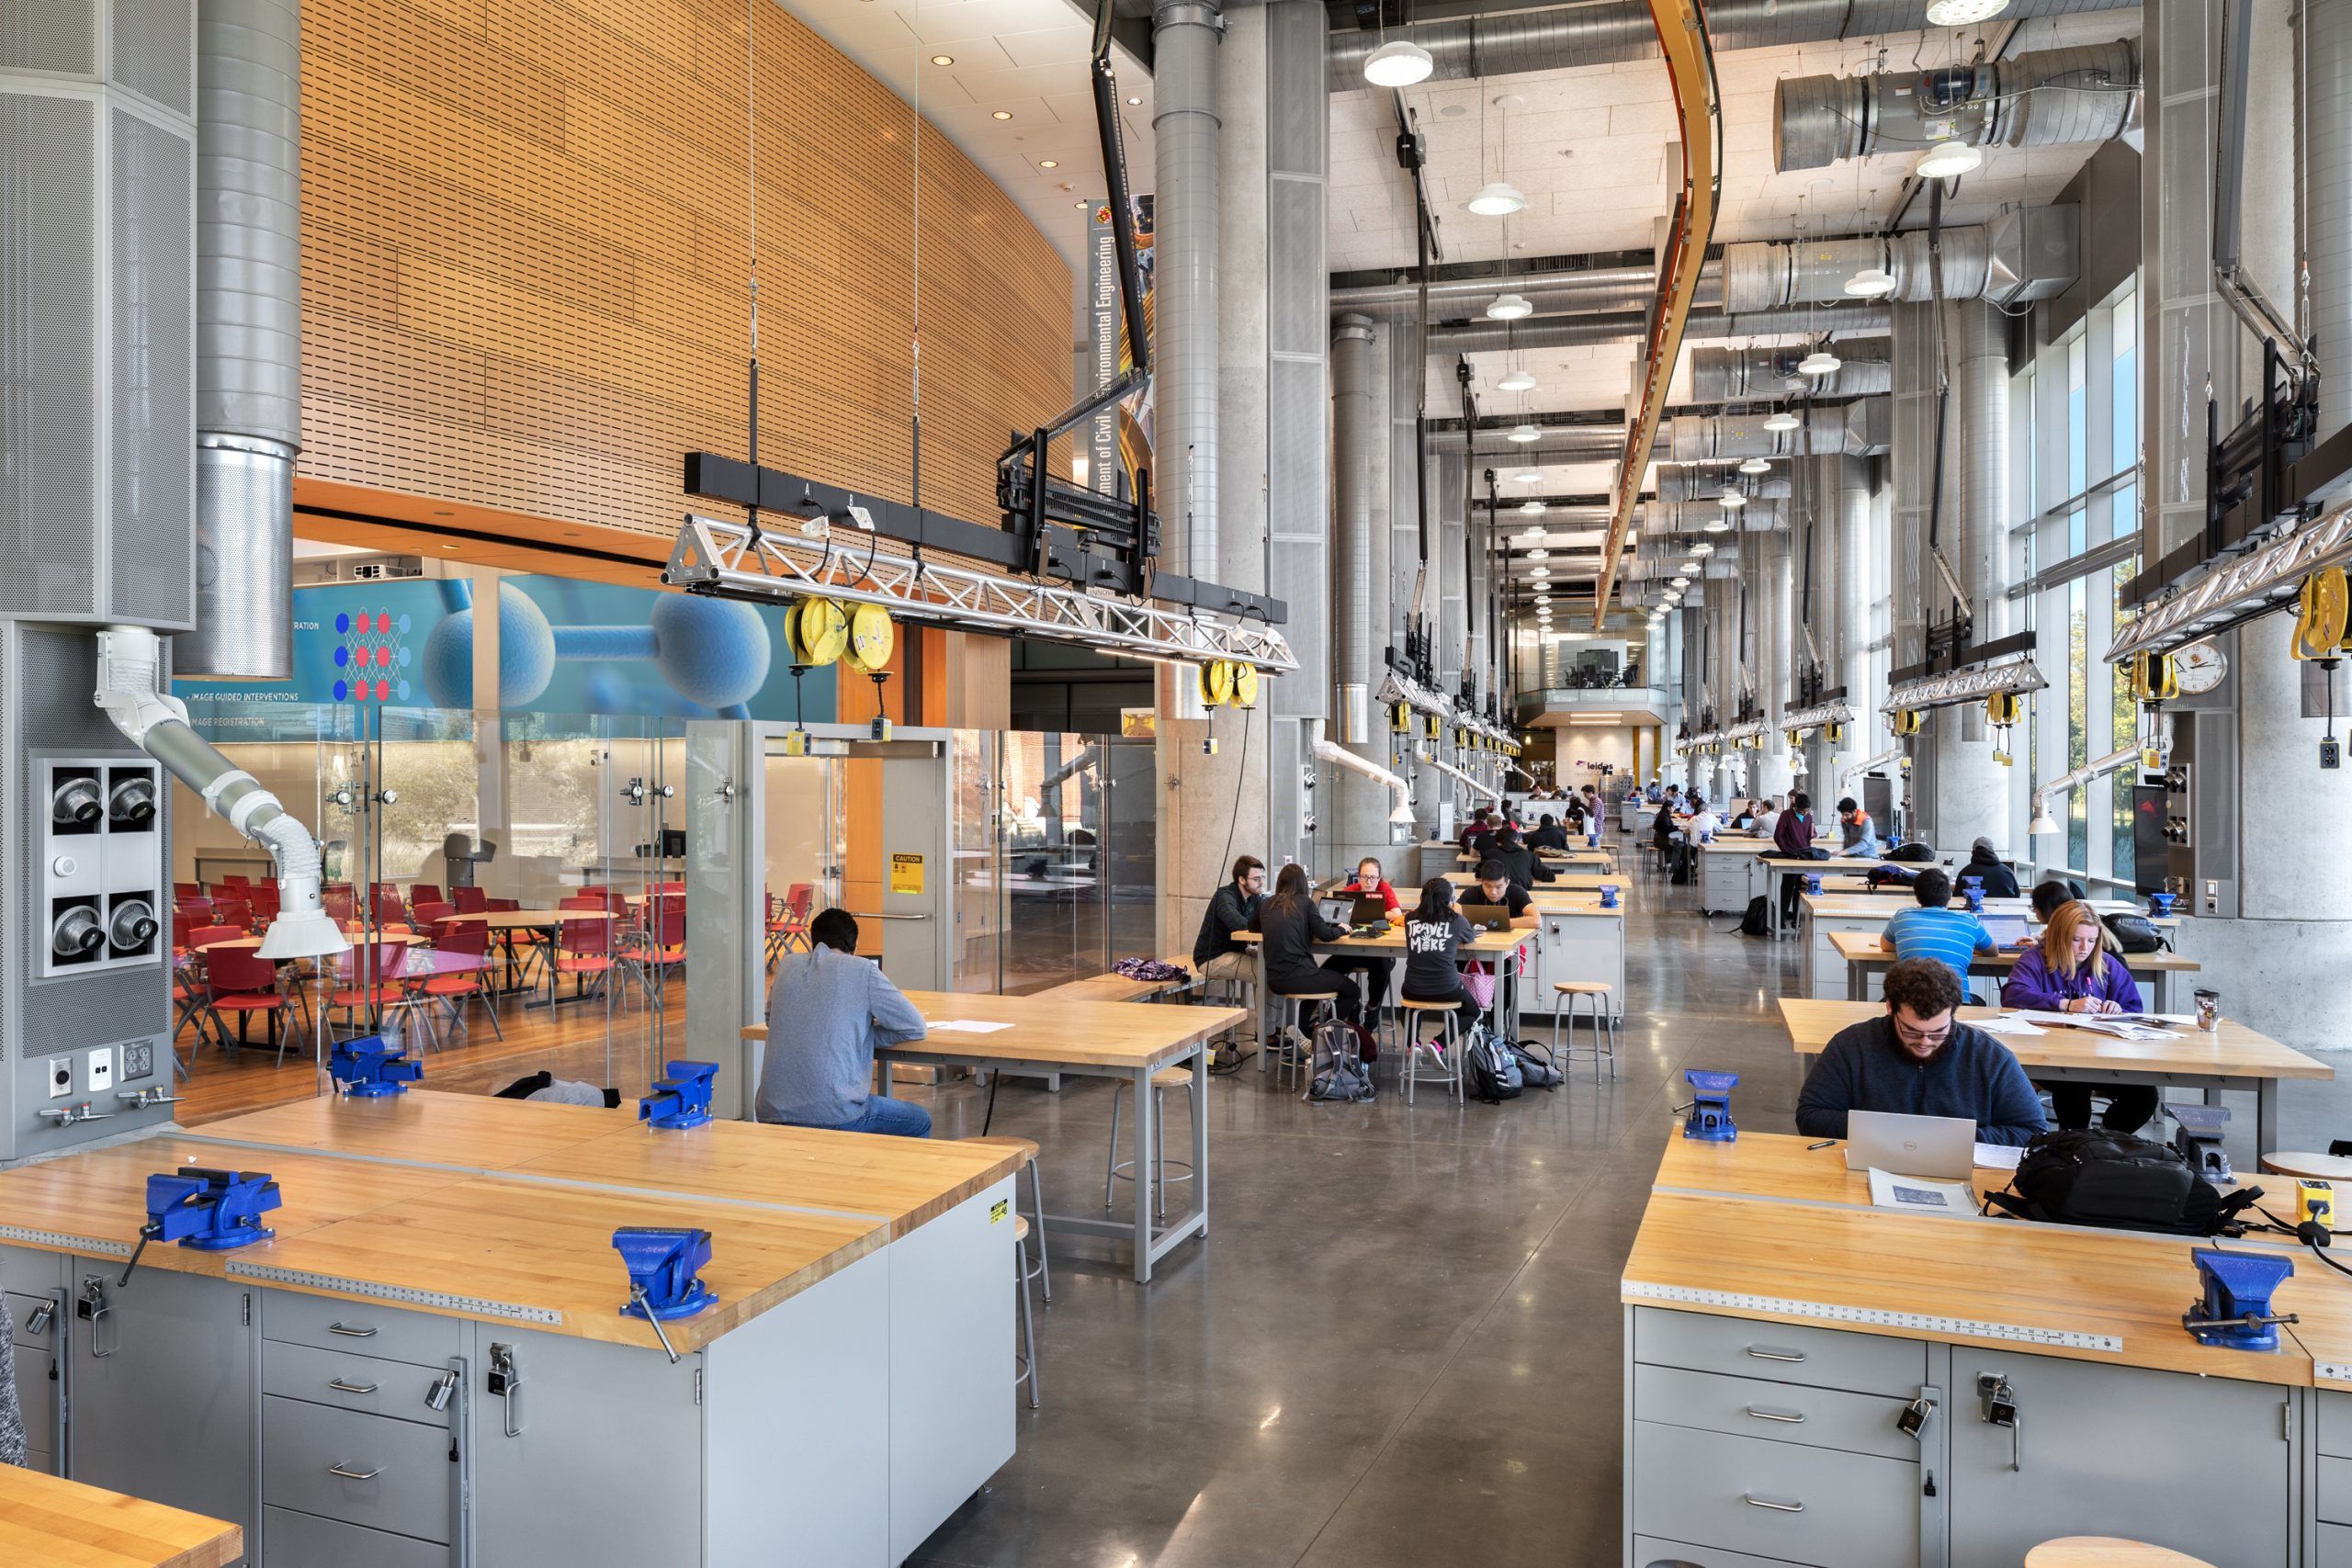 Maker space with exposed engineering systems and workstations in an open floorplan